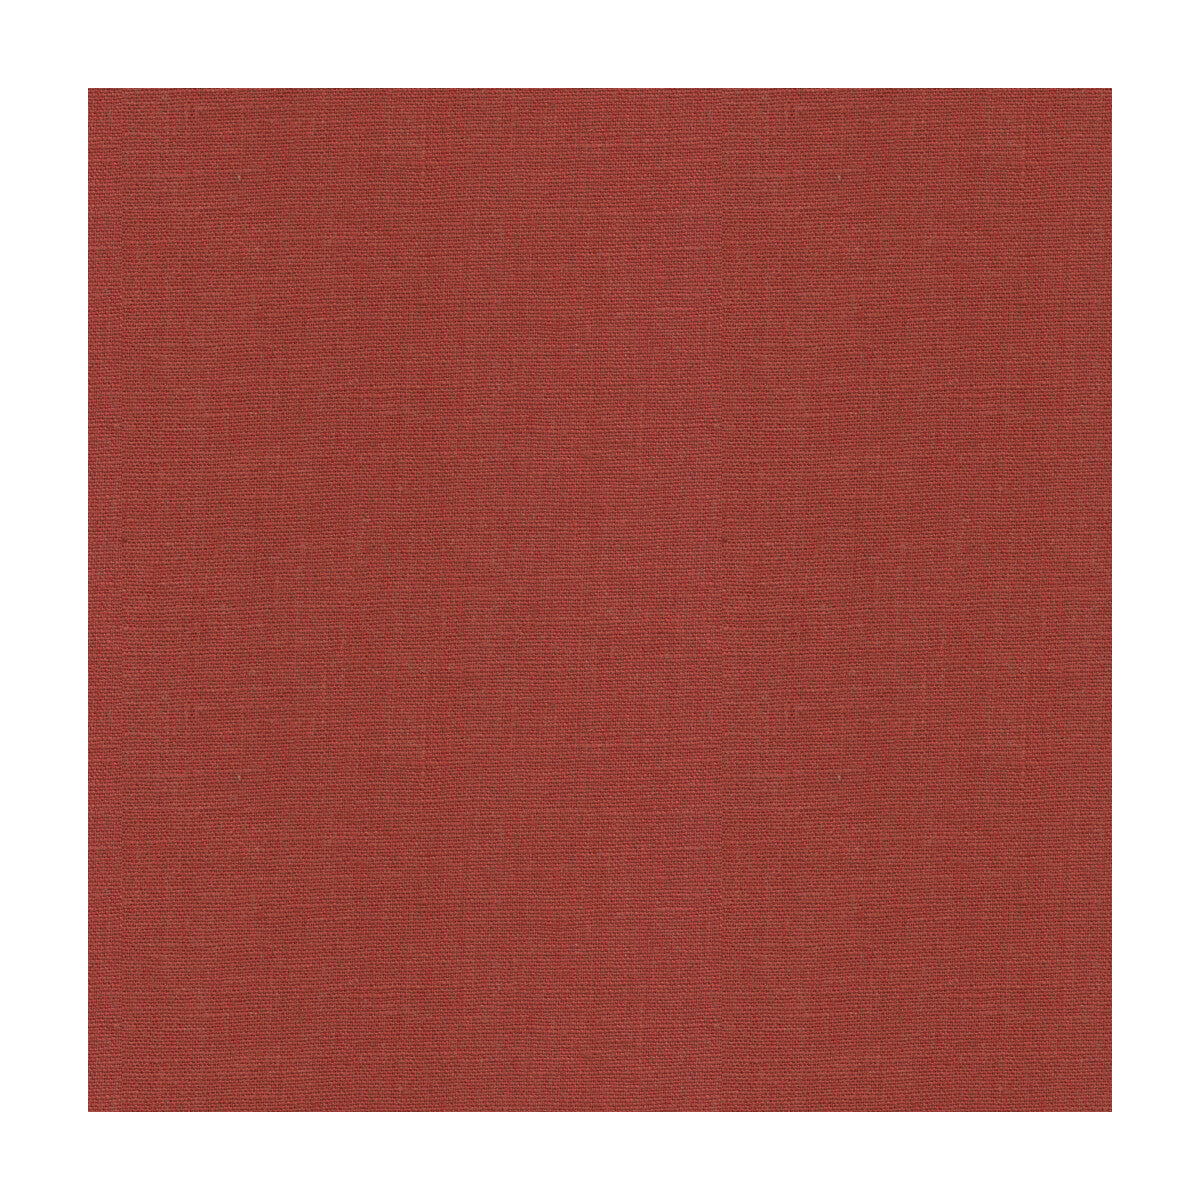 Dublin fabric in brick color - pattern 32344.97.0 - by Kravet Basics in the Perfect Plains collection